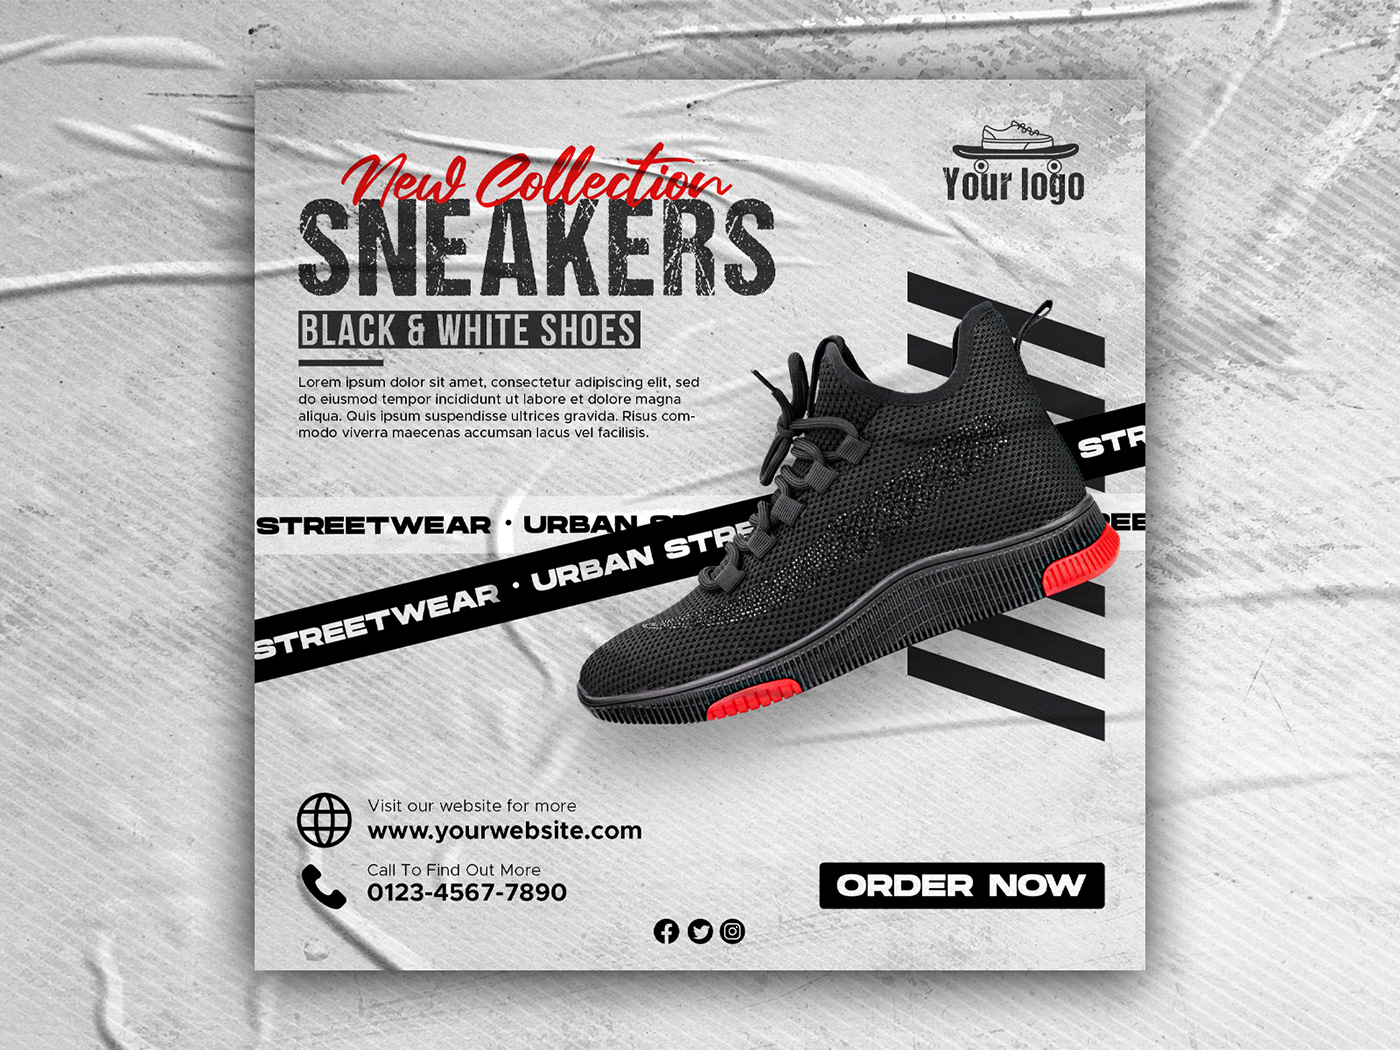 Sneakers collection post, shoes ads post, Instagram post, Facebook Post, Social  media post design